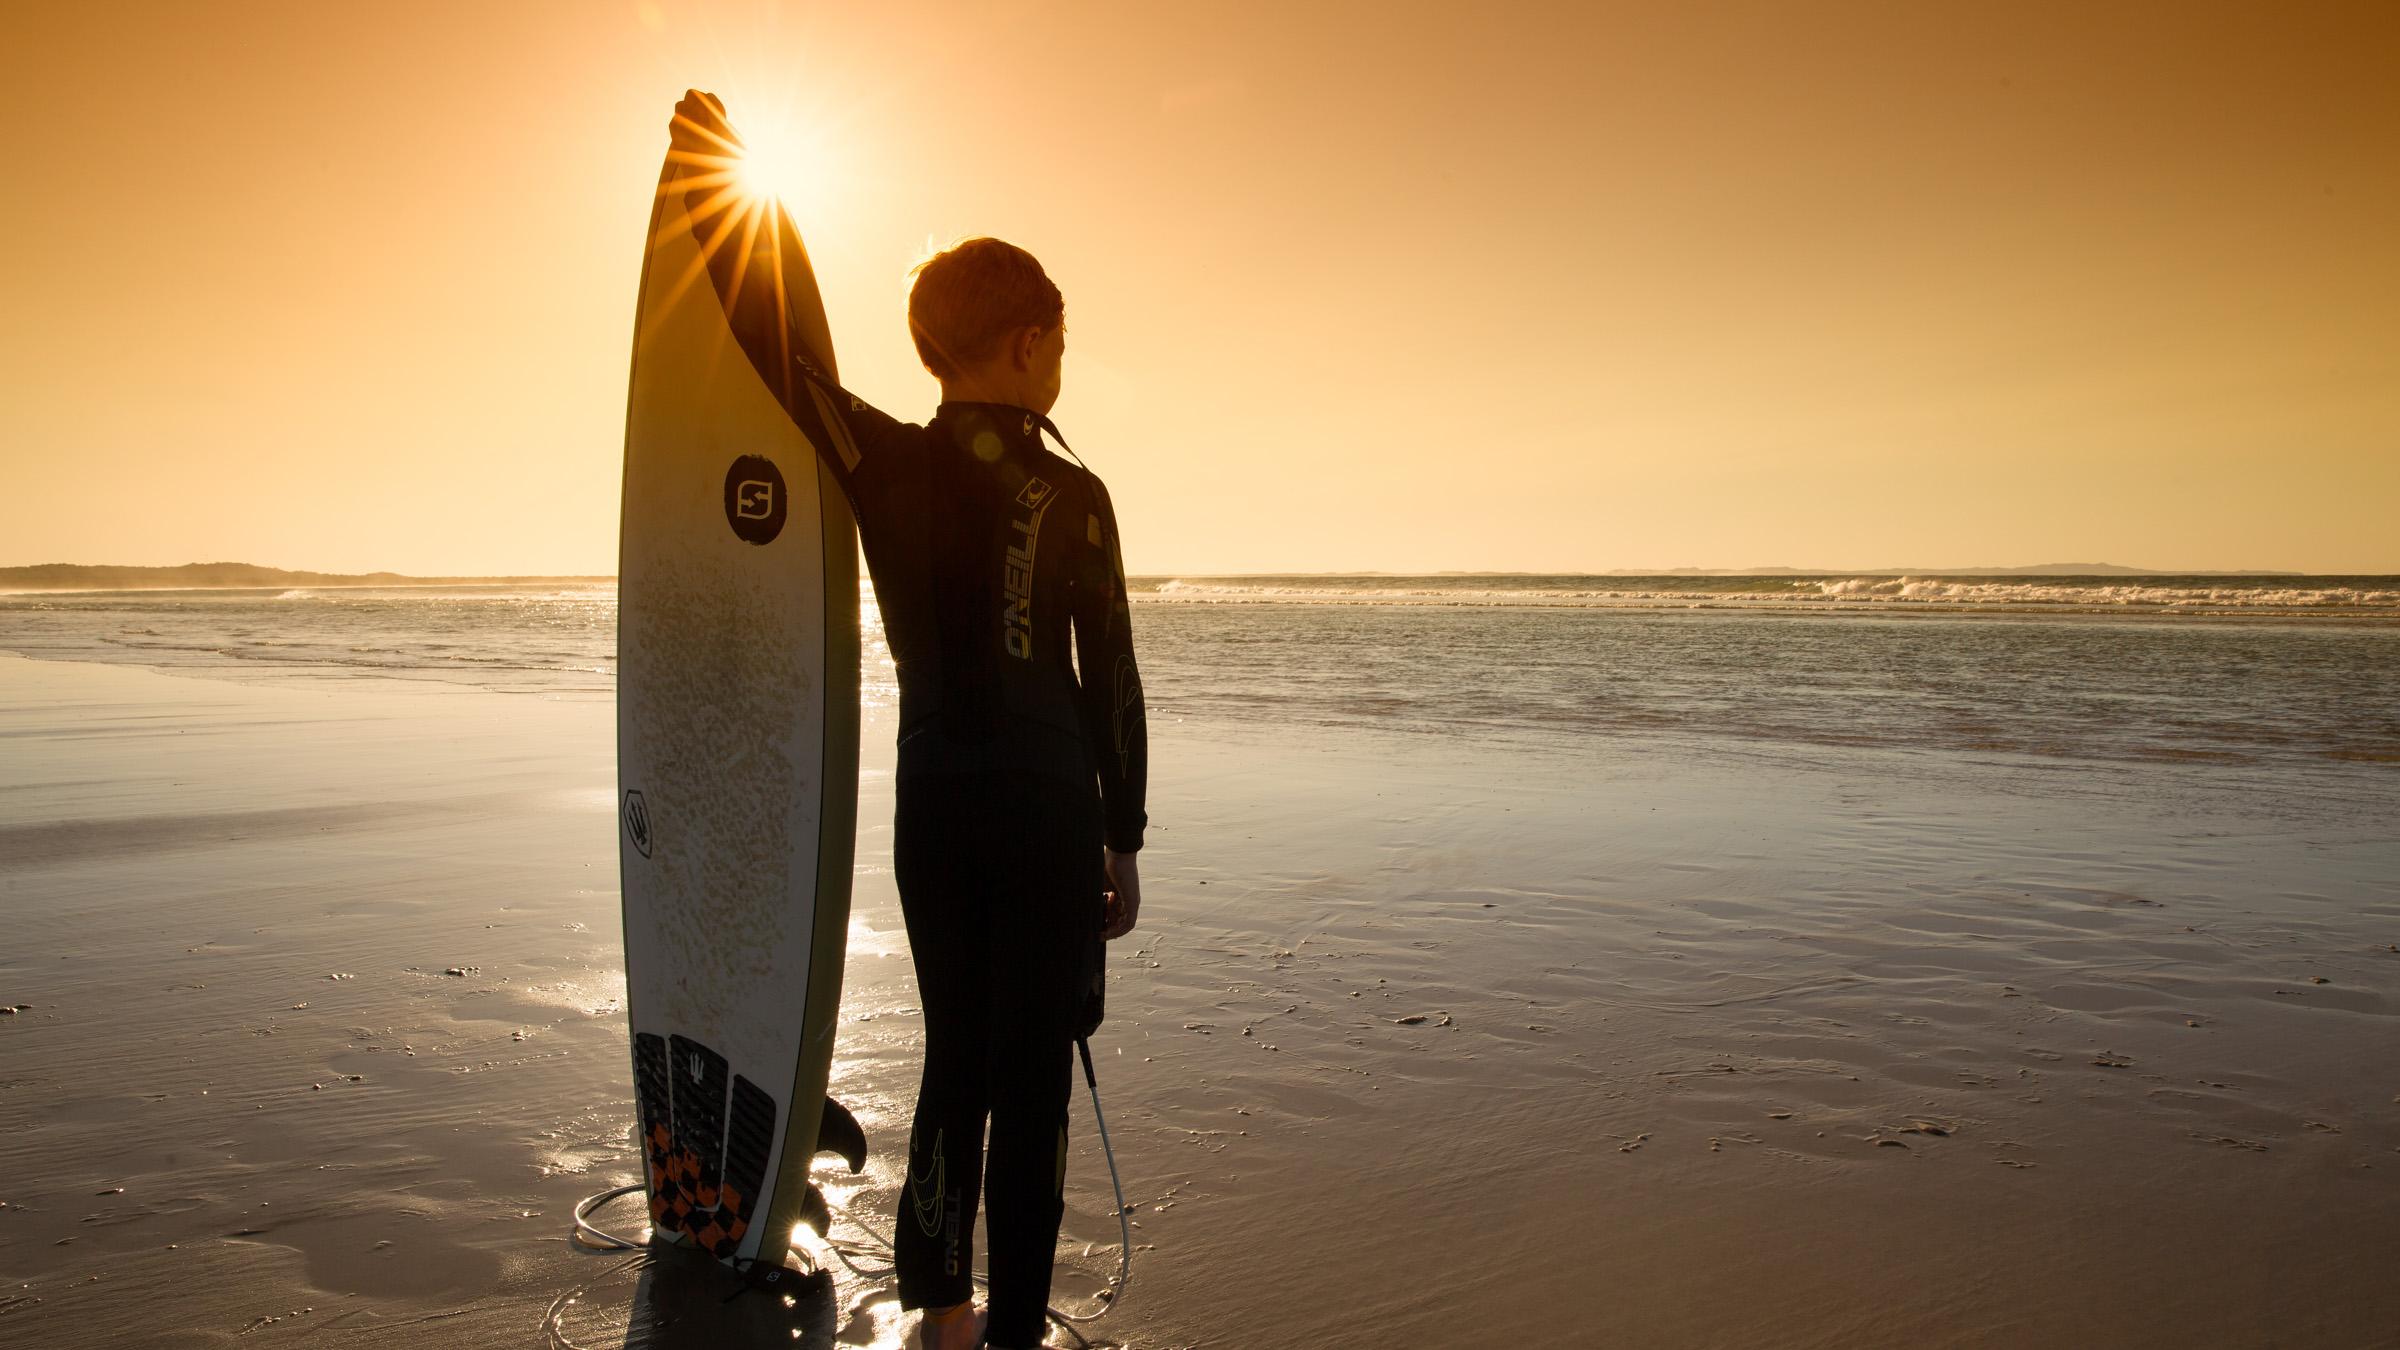 Child surfer on the shore holding a surfboard and looking out to the water